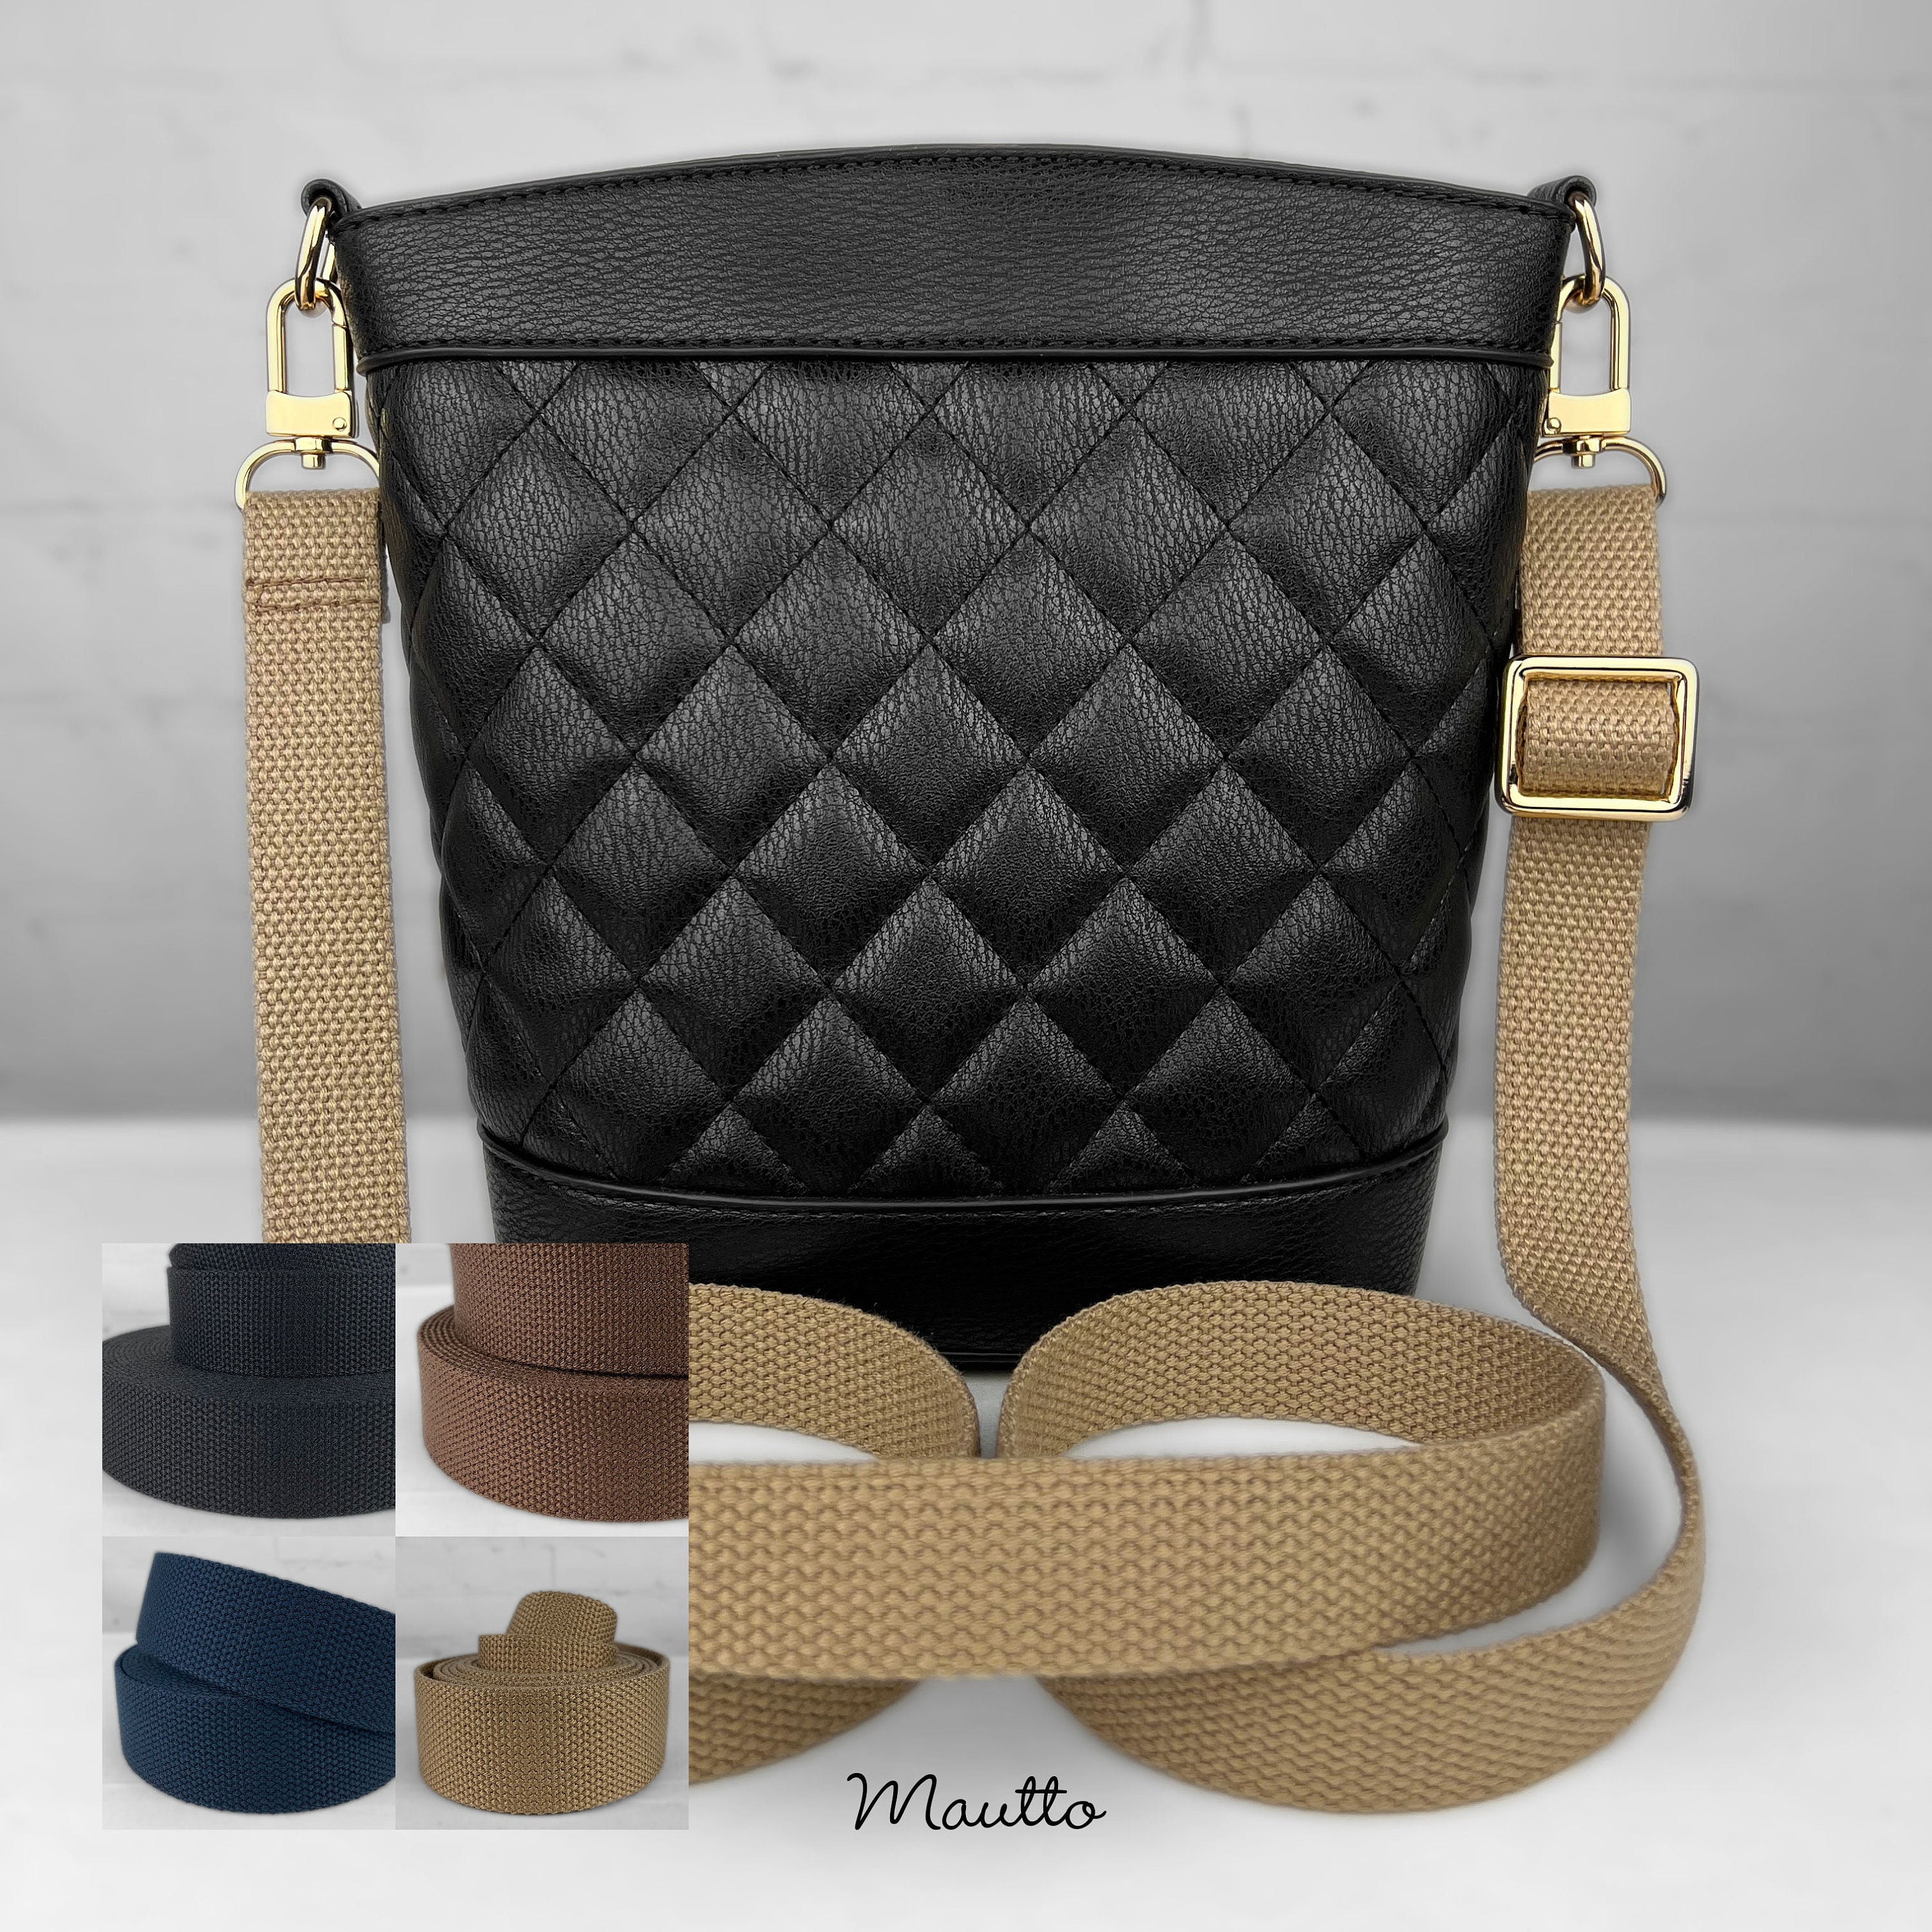 Black Pebble Leather Strap Shoulder to Crossbody Lengths 1 Inch